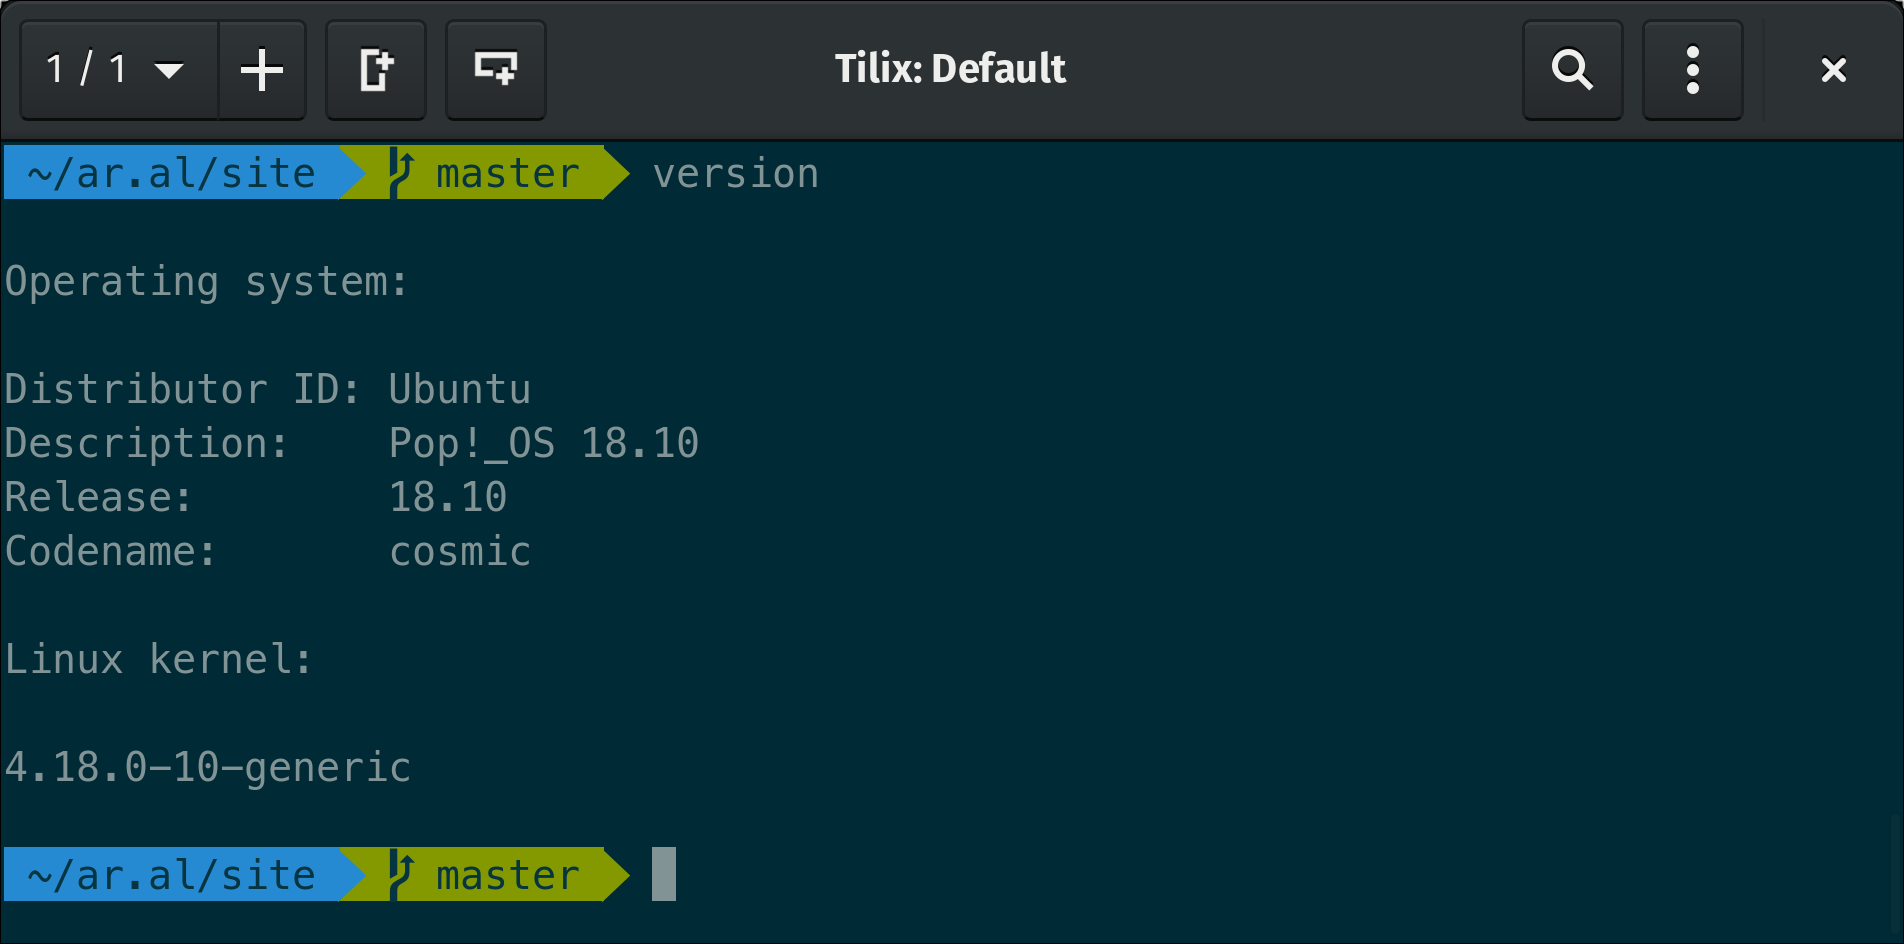 Screenshot of my simple version script running in Terminal. The information displayed is recreated at the end of this post.